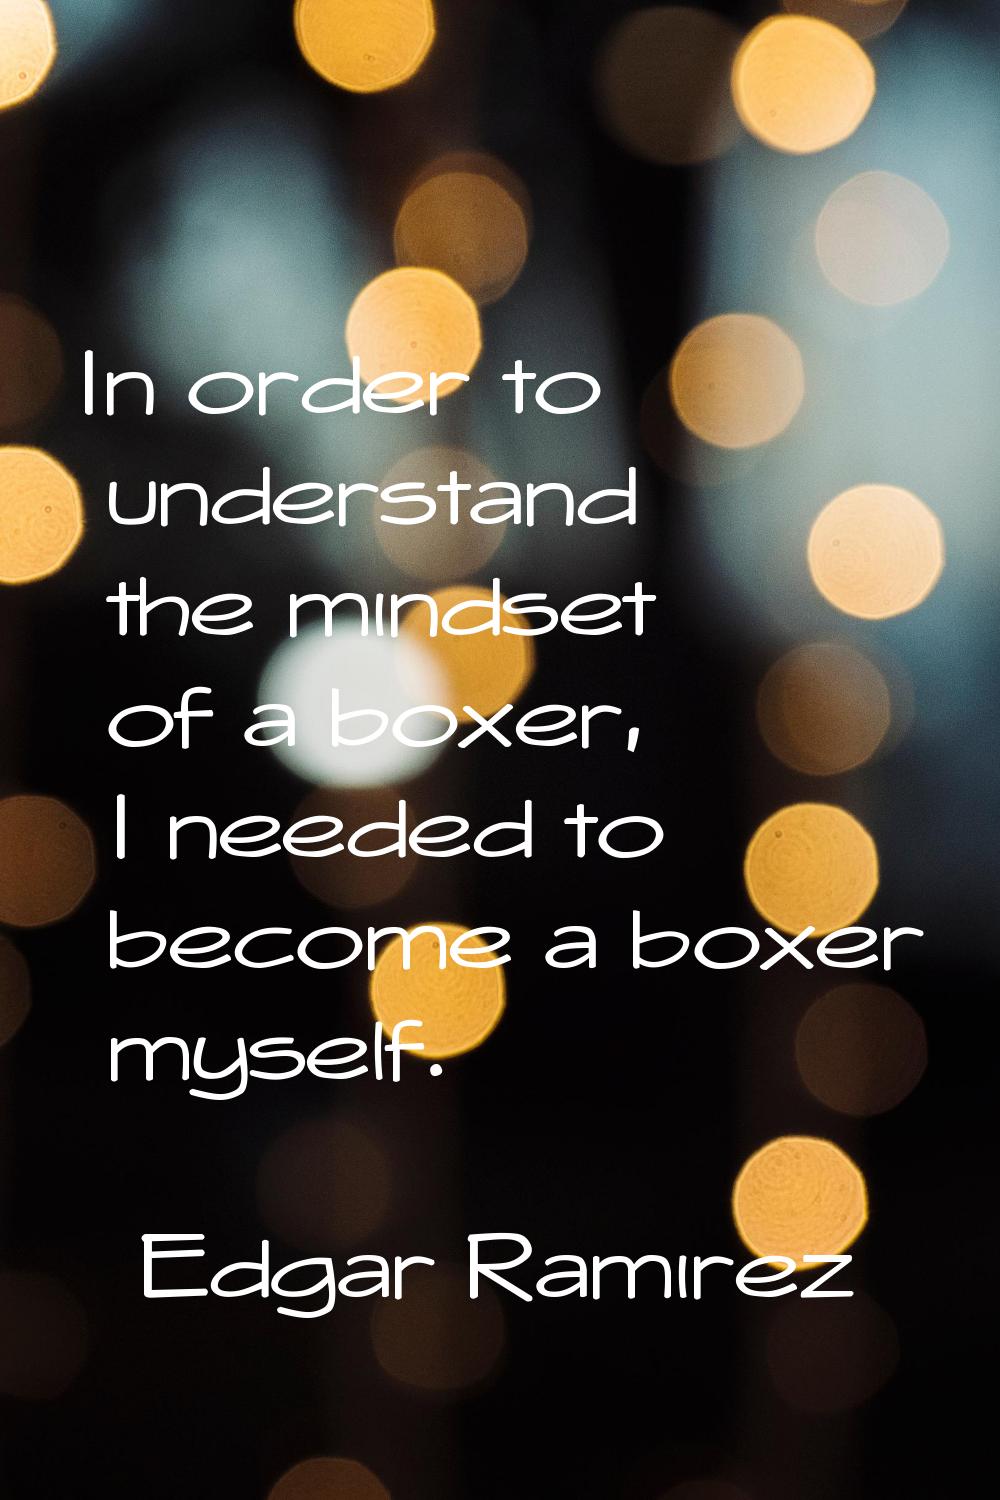 In order to understand the mindset of a boxer, I needed to become a boxer myself.